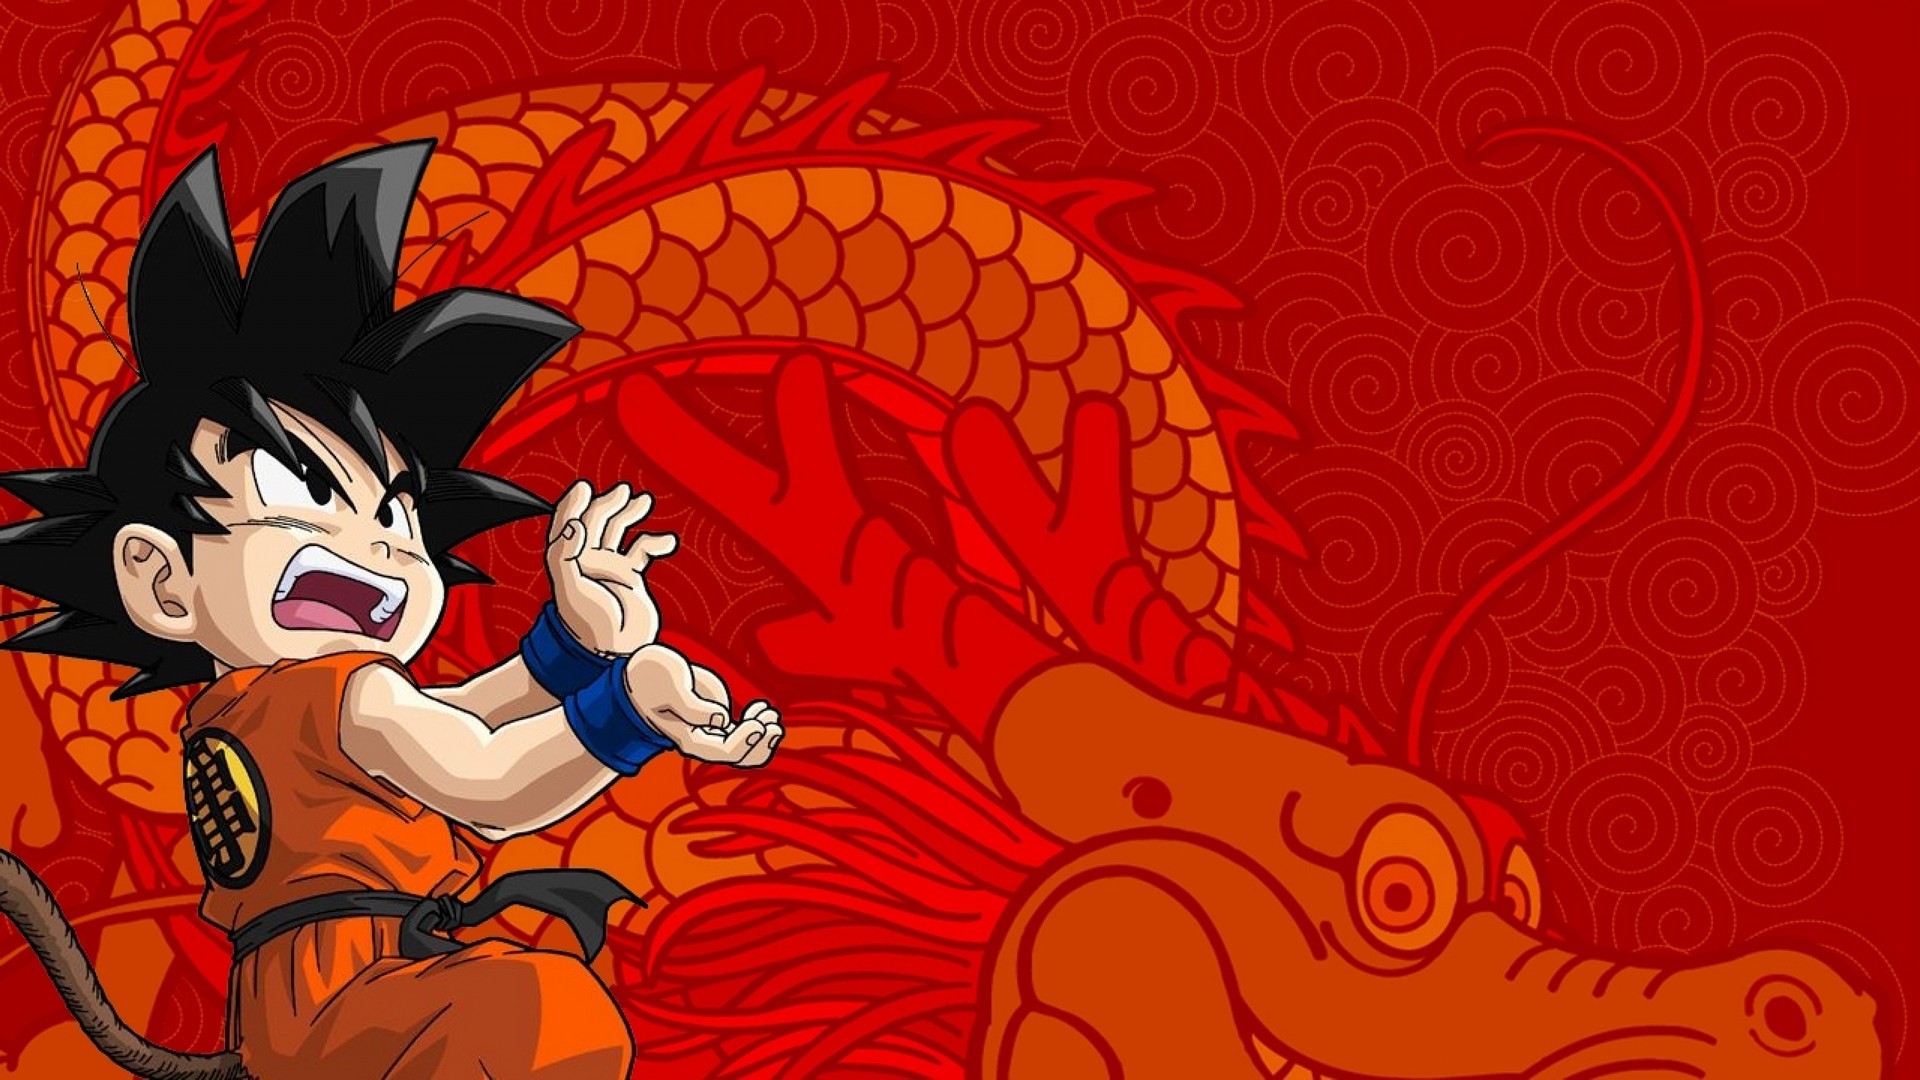 Wallpapers Kid Goku With Resolution 1920X1080 pixel. You can make this wallpaper for your Desktop Computer Backgrounds, Mac Wallpapers, Android Lock screen or iPhone Screensavers